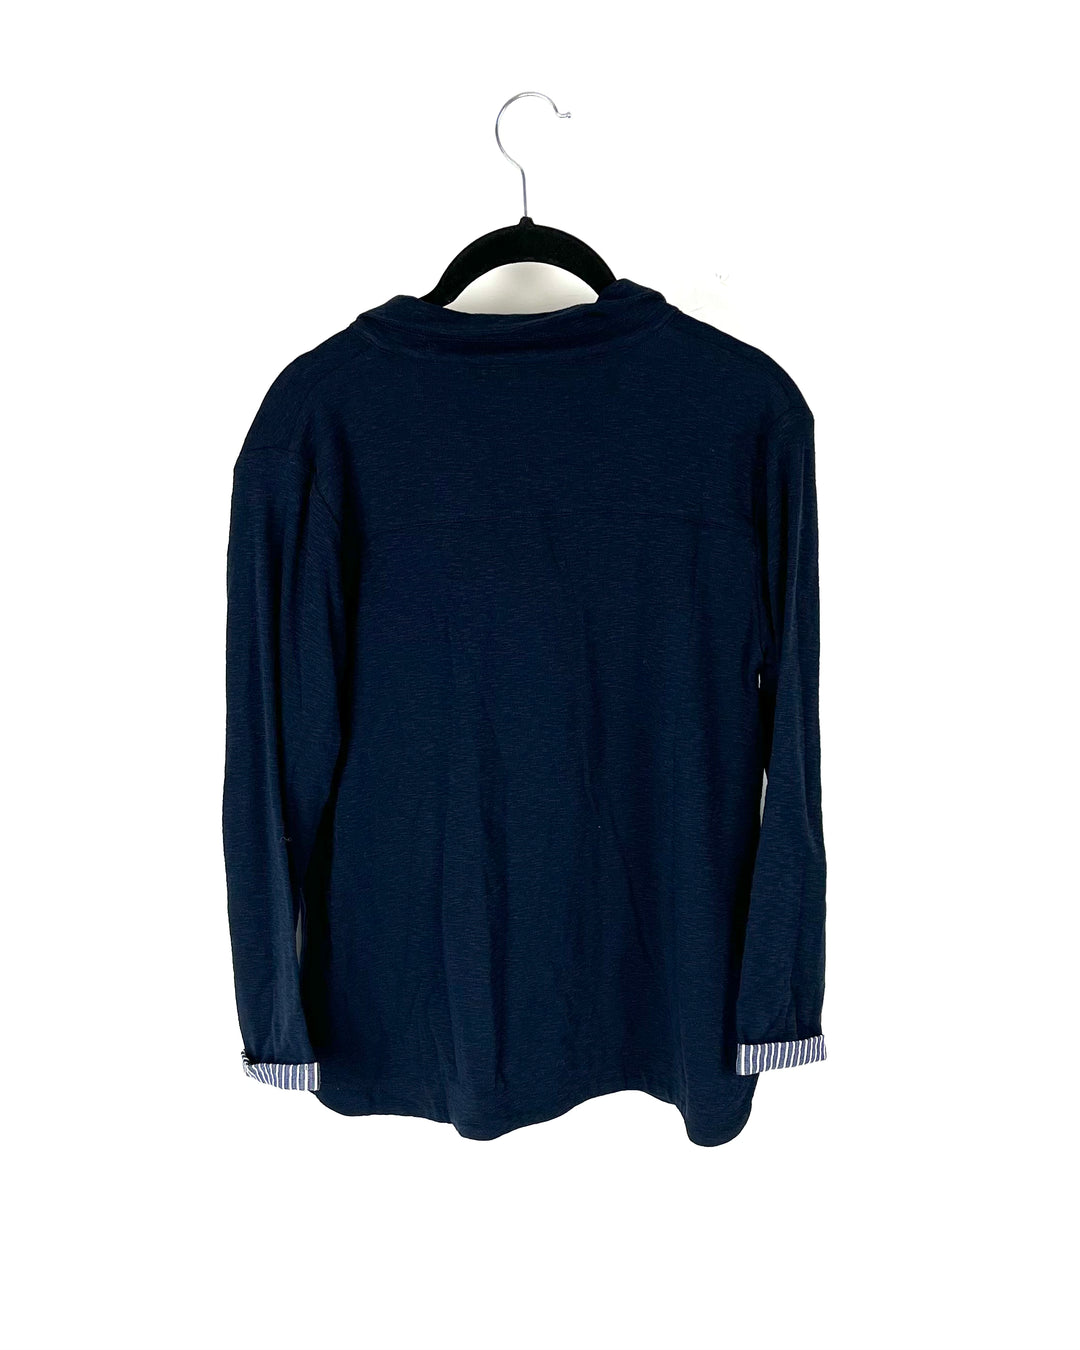 Navy Blue Button Down Sweater - Small